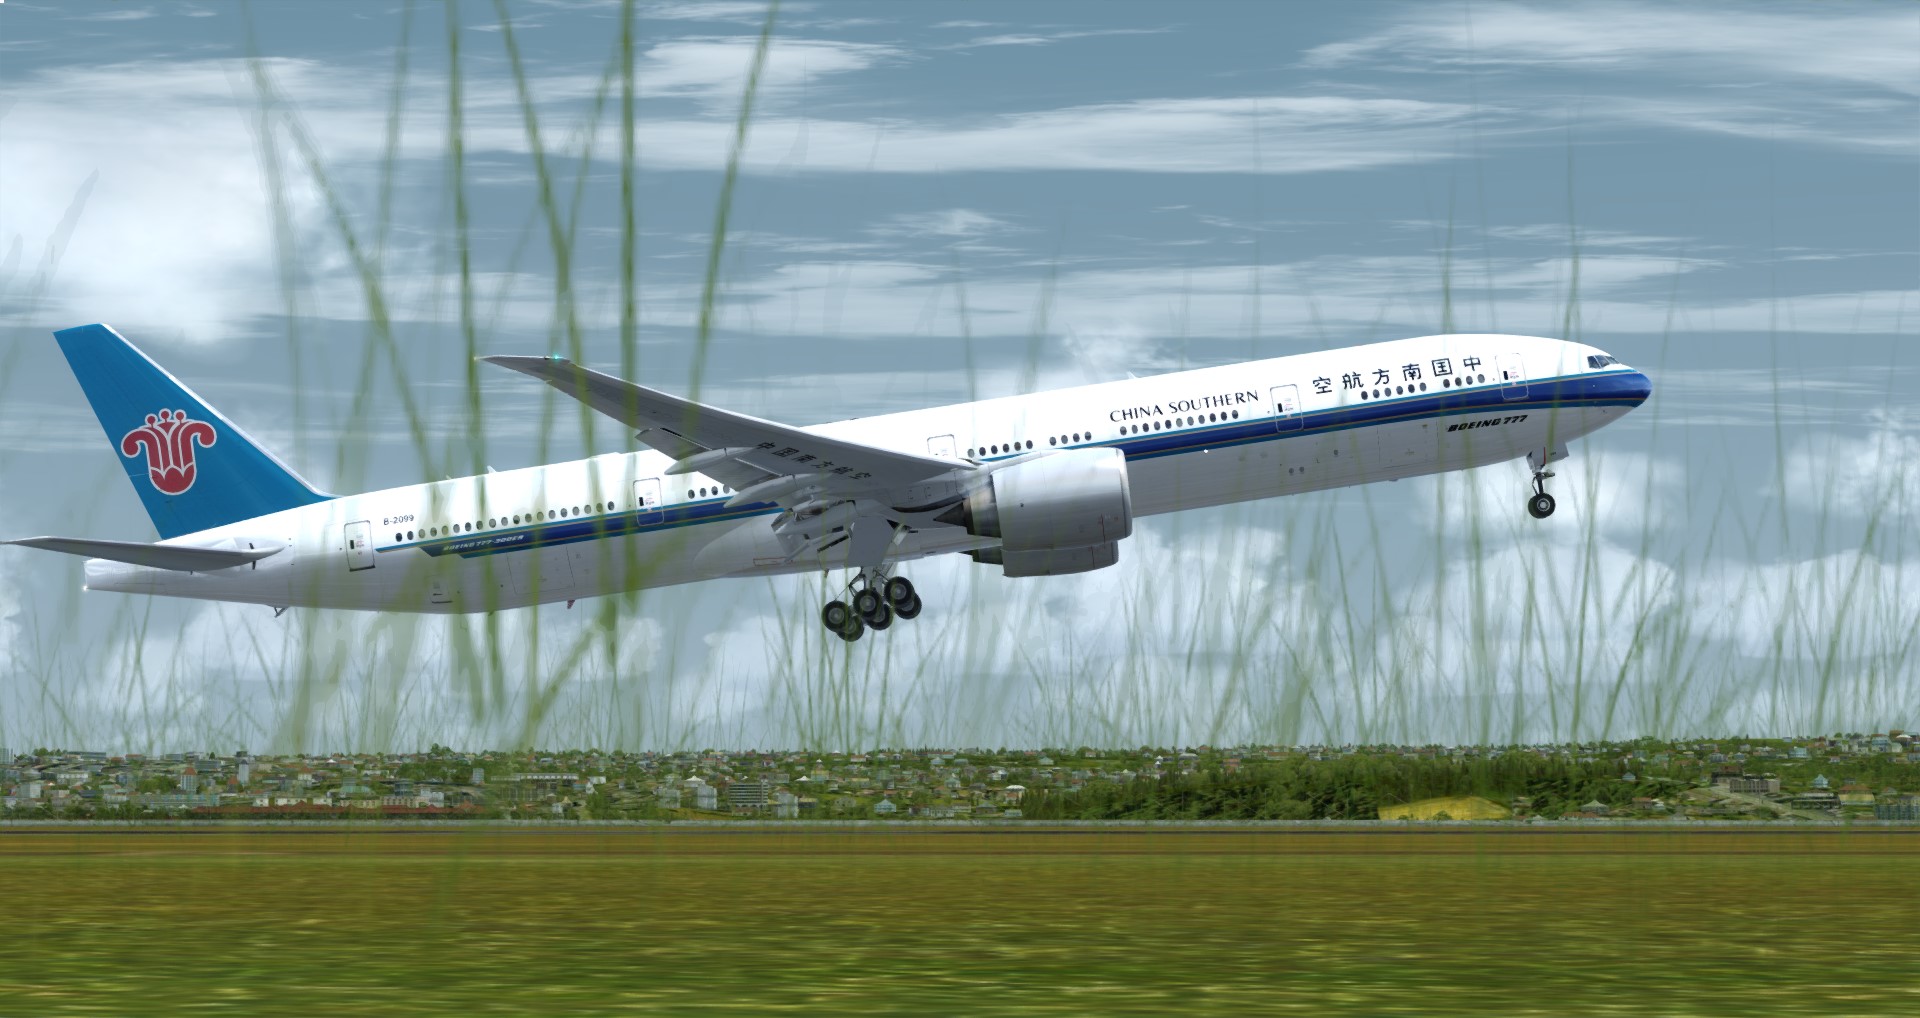 P3D V4 77W China Southern Airlines WADD-ZGGG 营救同胞-1700 